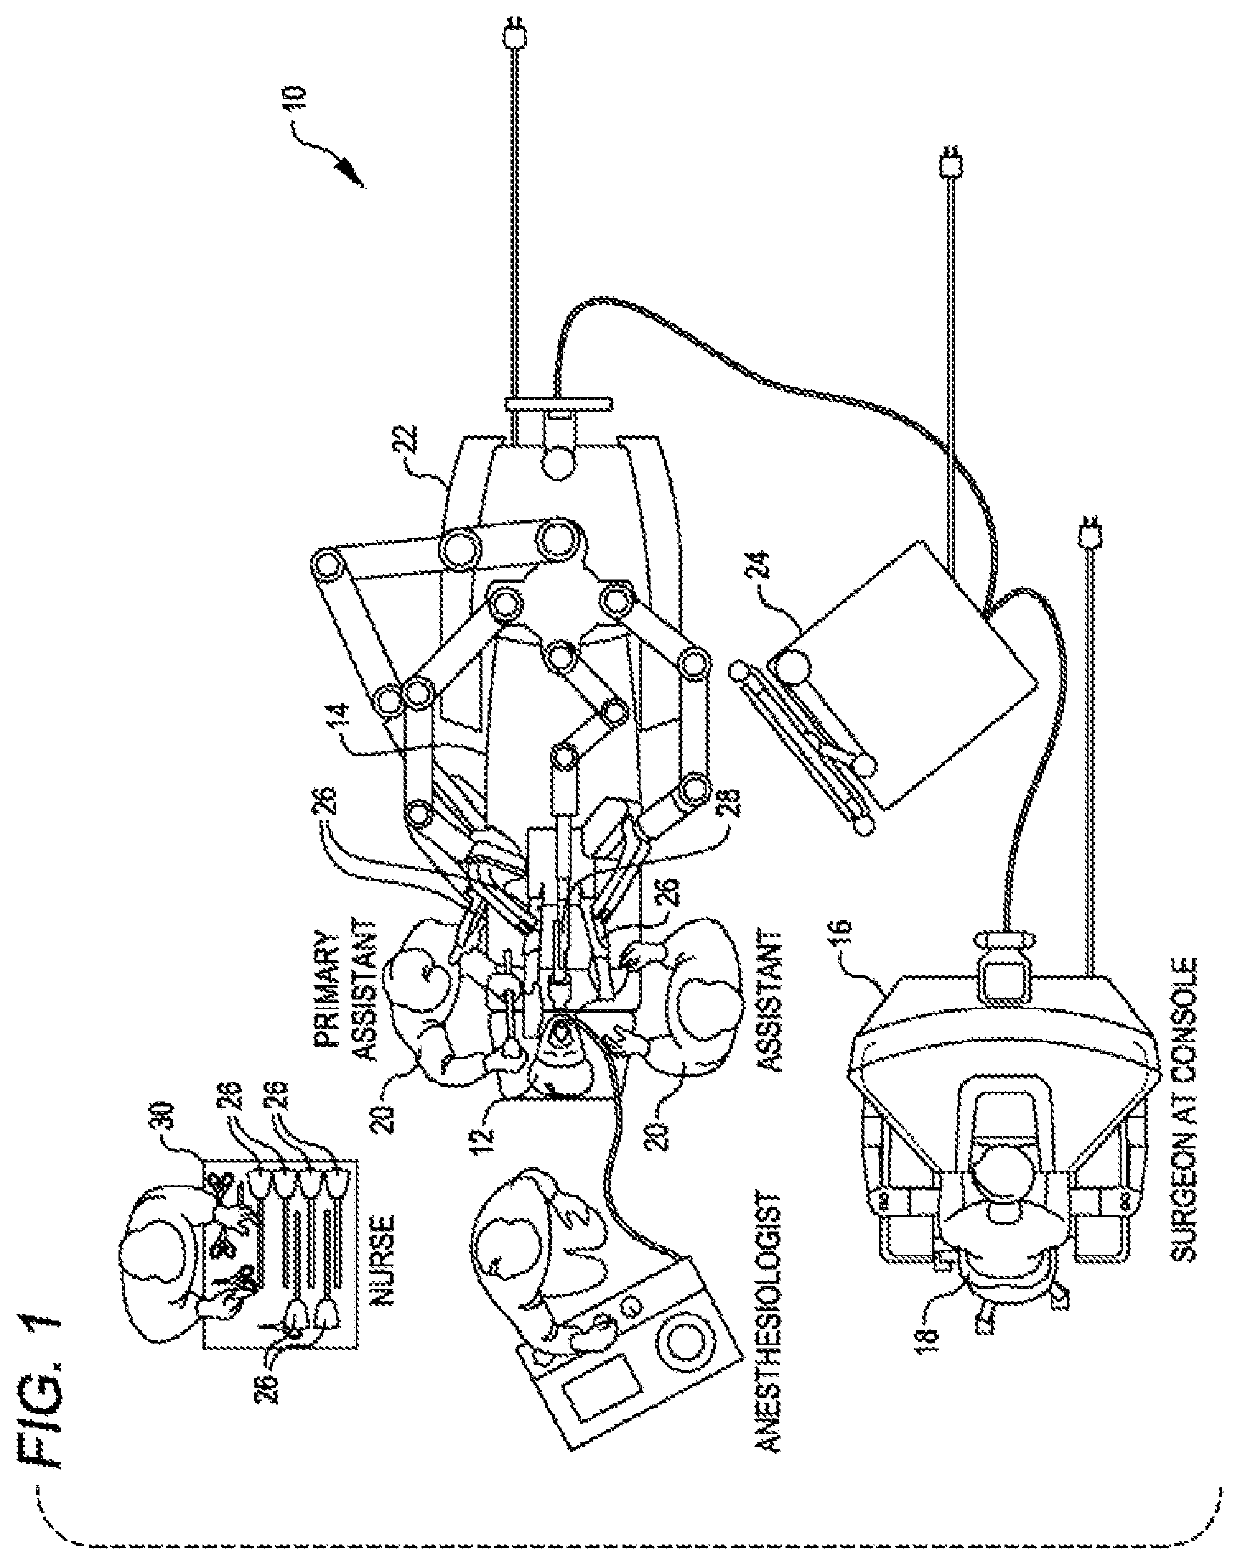 Surgical instrument with shiftable transmission